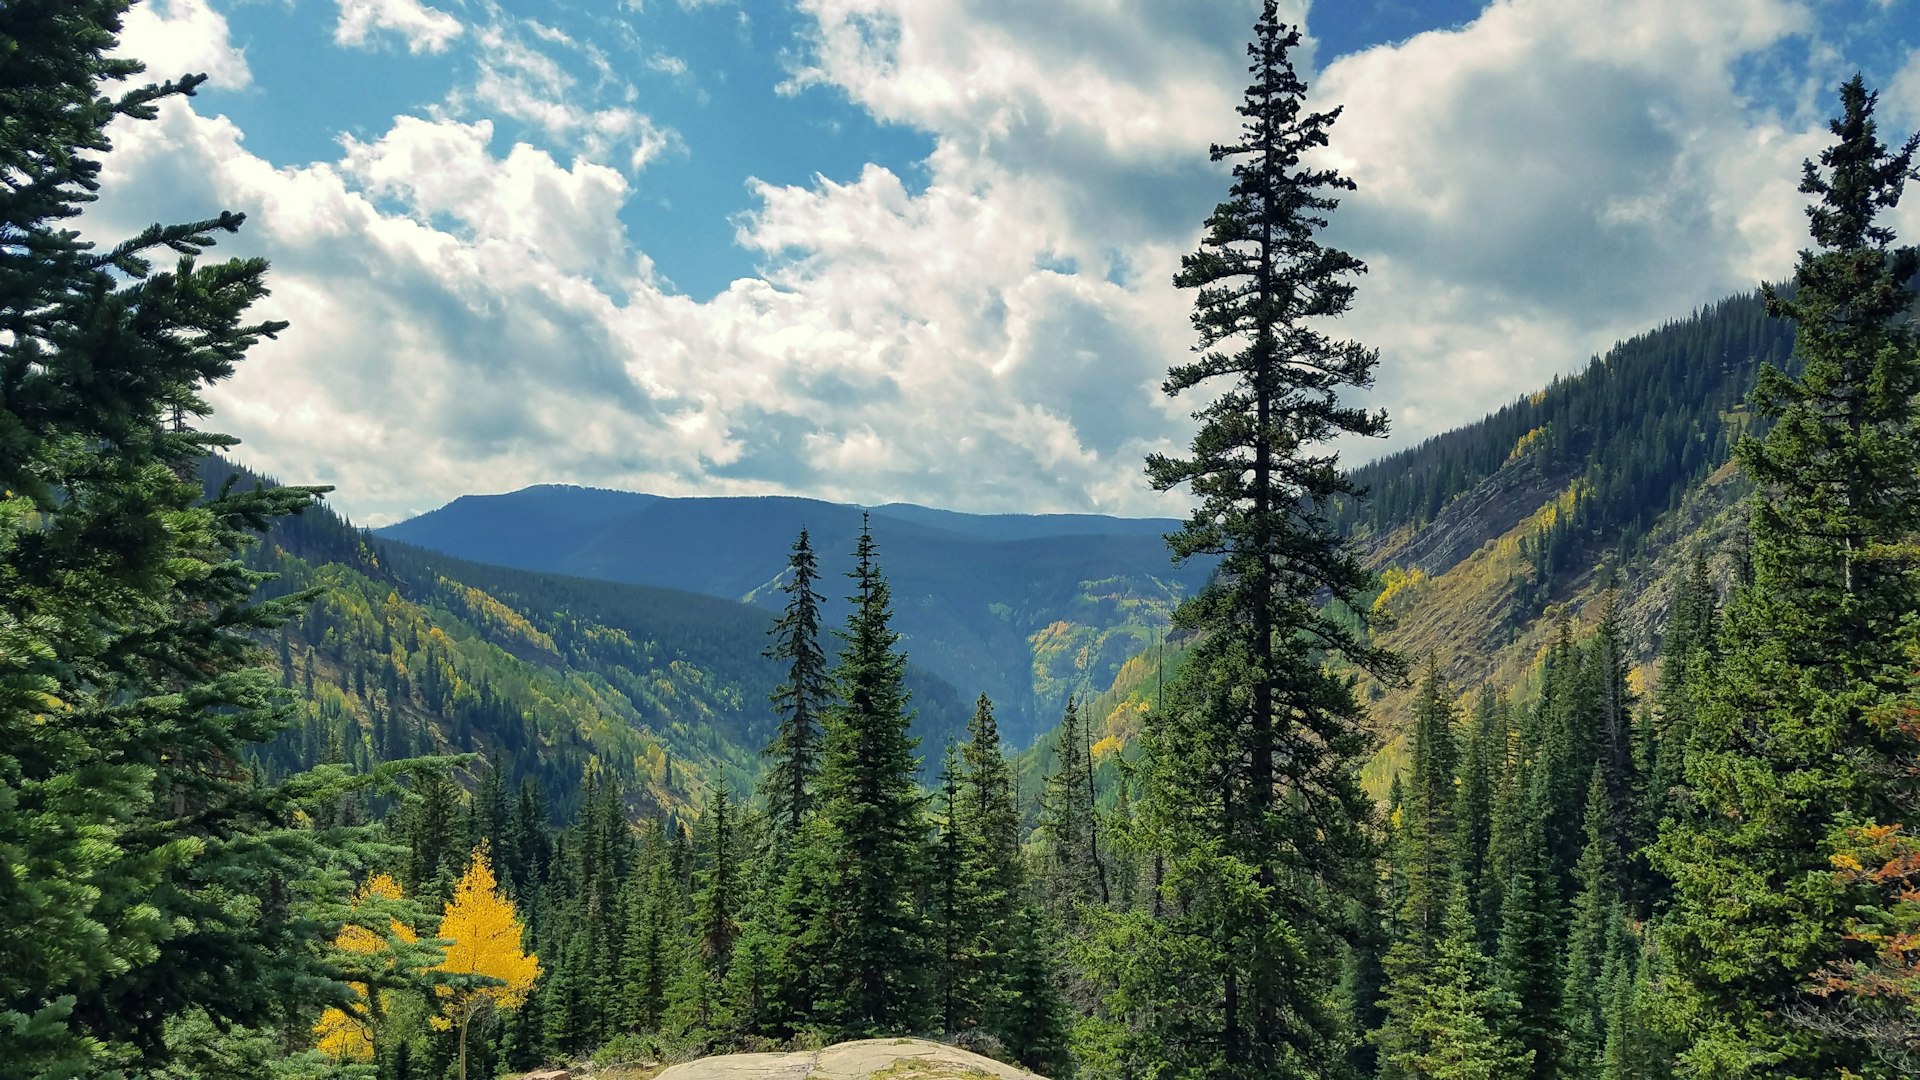 Tall pine trees and golden aspens with a mountain valley beyond seen from the Booth Falls Trail in Vail, CO